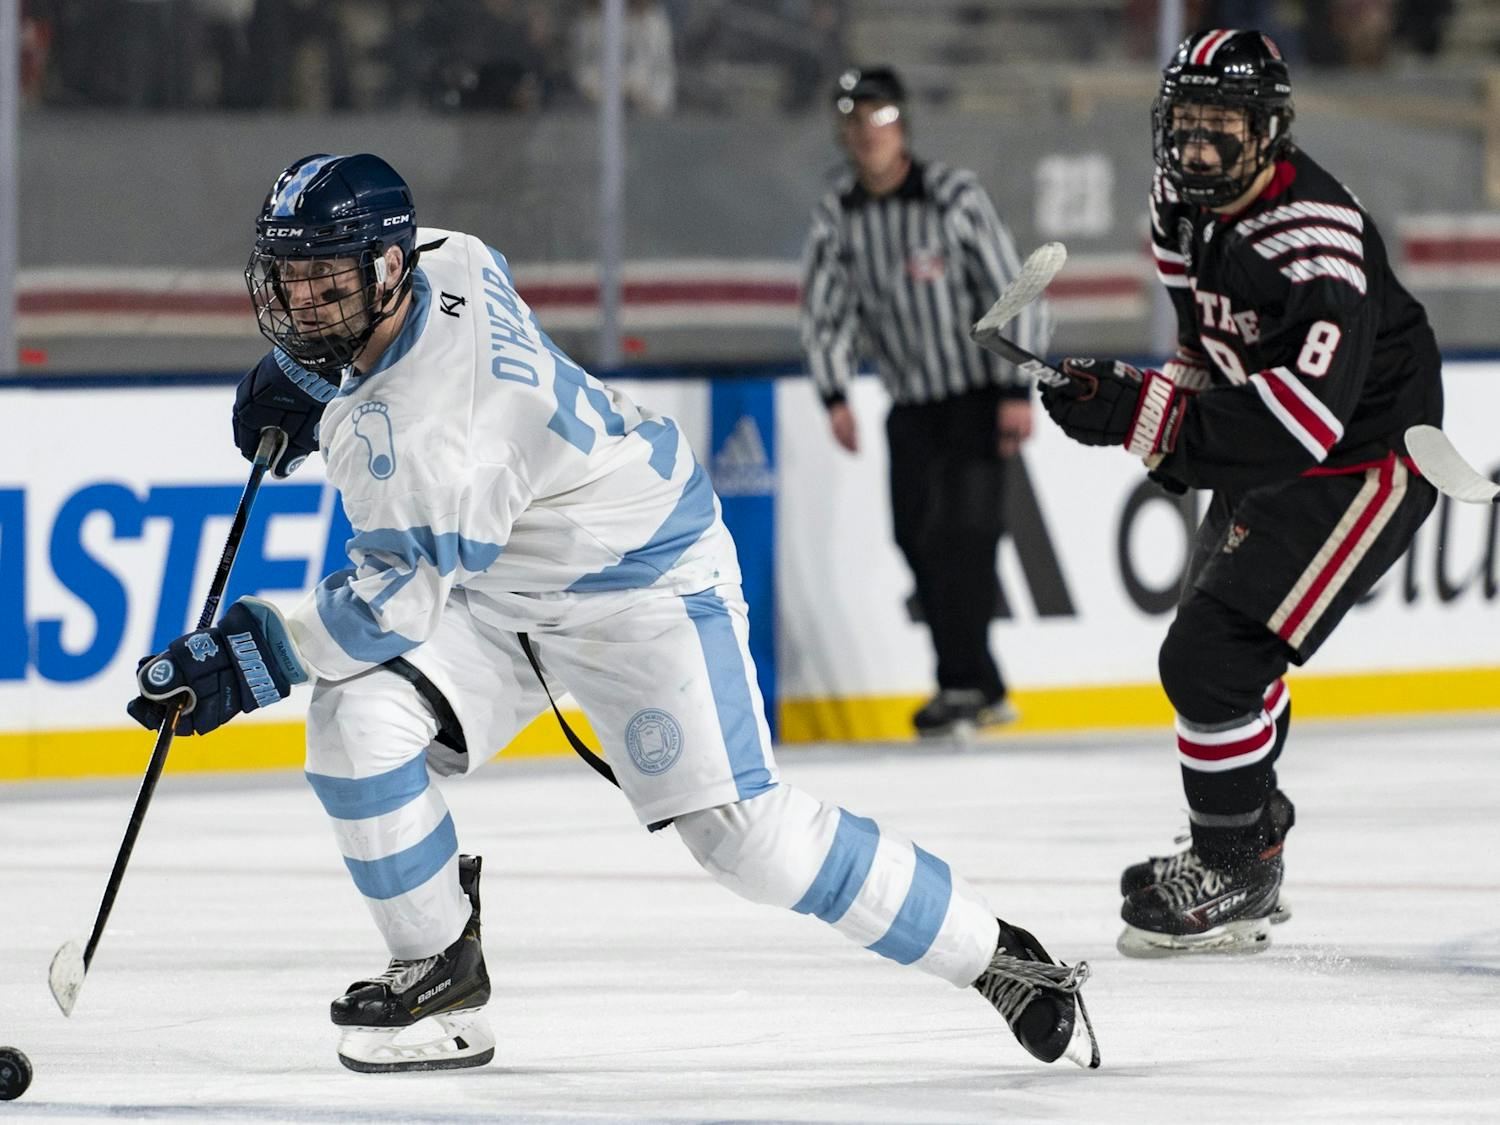 UNC forward Dan O'Hear (77) moves toward the goal with the puck during the ice hockey game at Carter-Finley Stadium on Monday, Feb. 20, 2023. UNC lost 7-3.